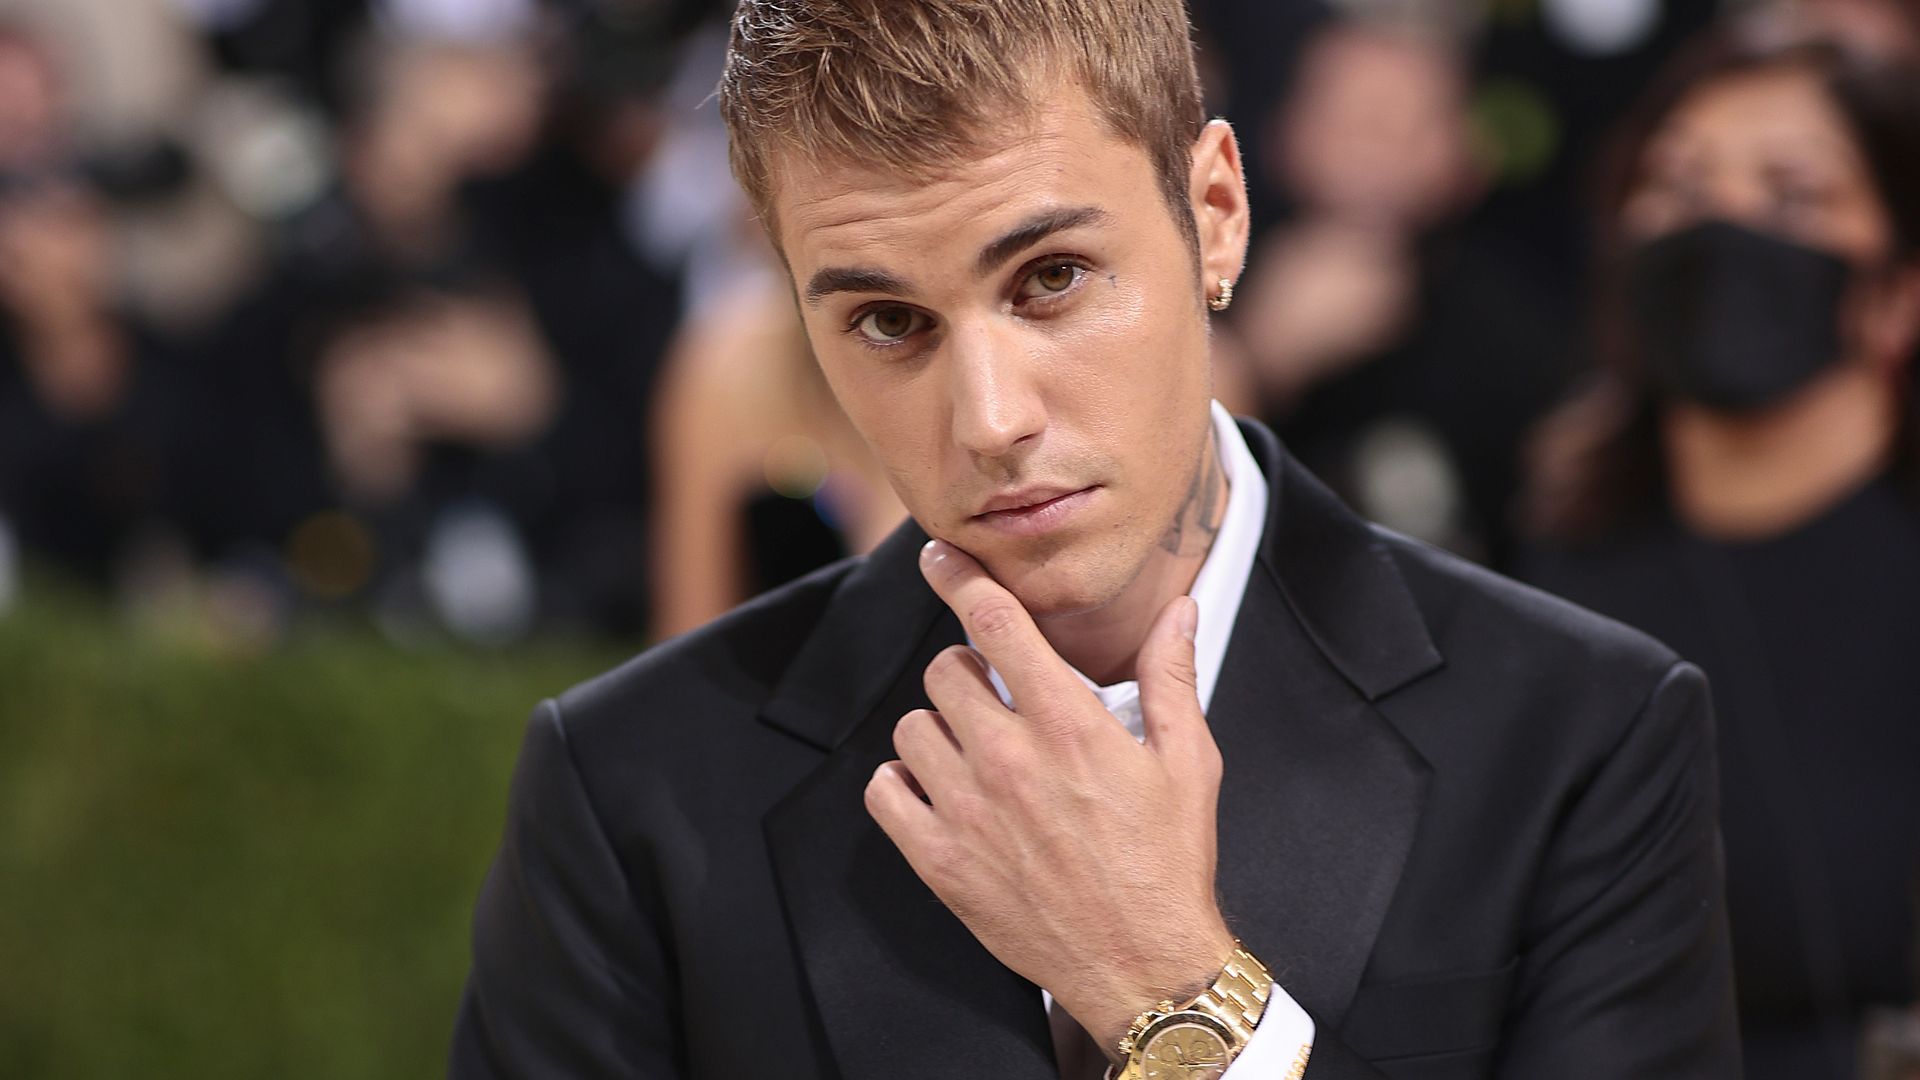 Justin Bieber turns 30: from childhood of poverty to teenage heartthrob, his $300 million fortune and fairytale romance with Hailey Bieber